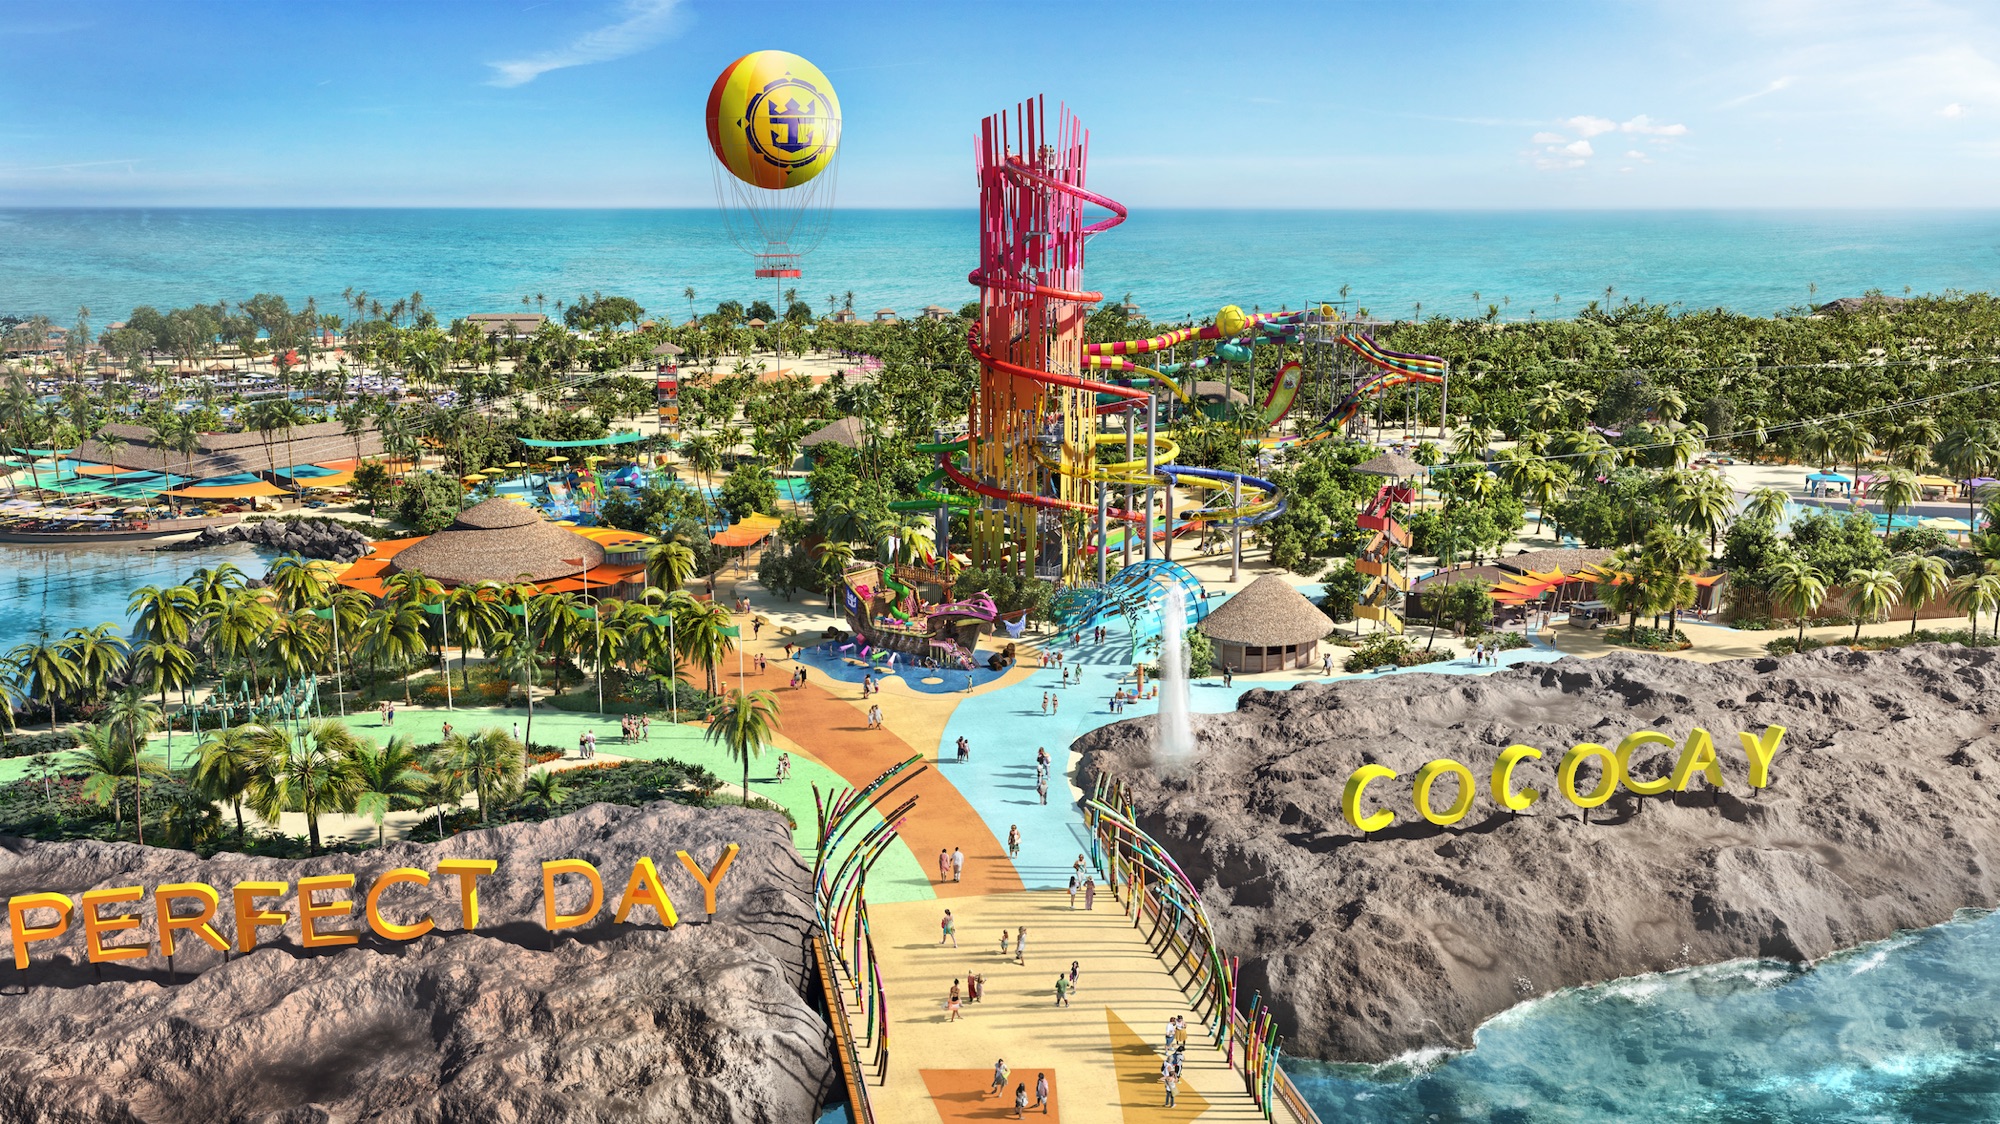 Perfect-Day-CocoCay-rendering